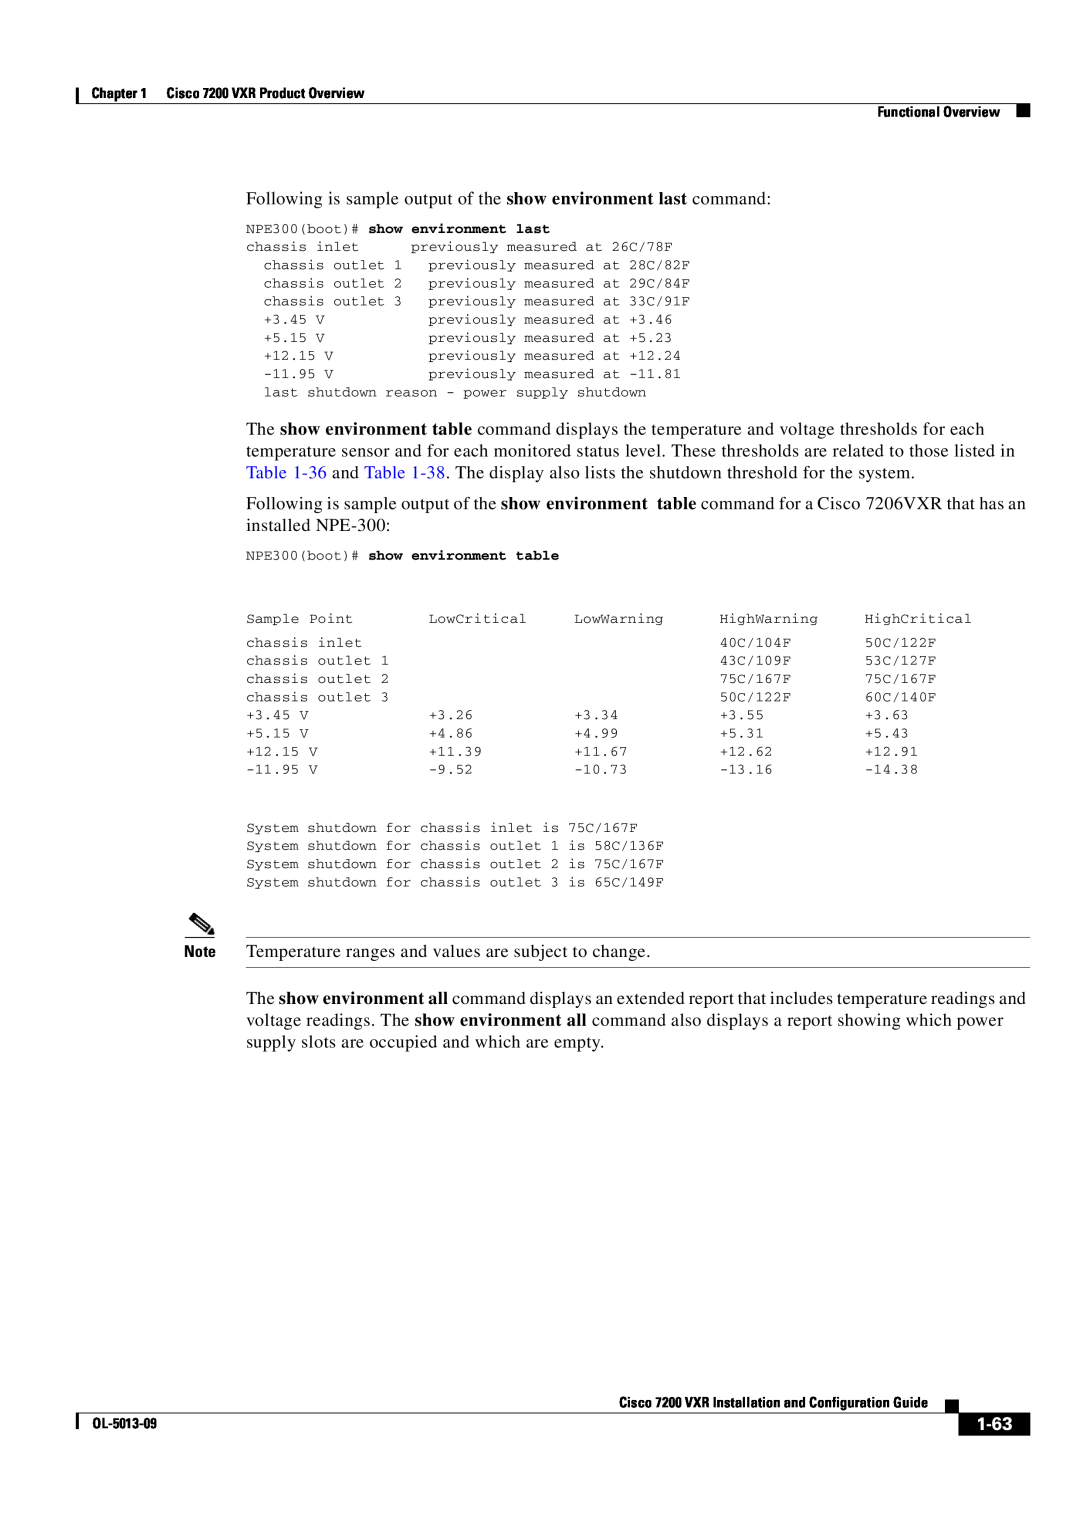 Cisco Systems 7200 VXR manual 1-63, Following is sample output of the show environment last command 